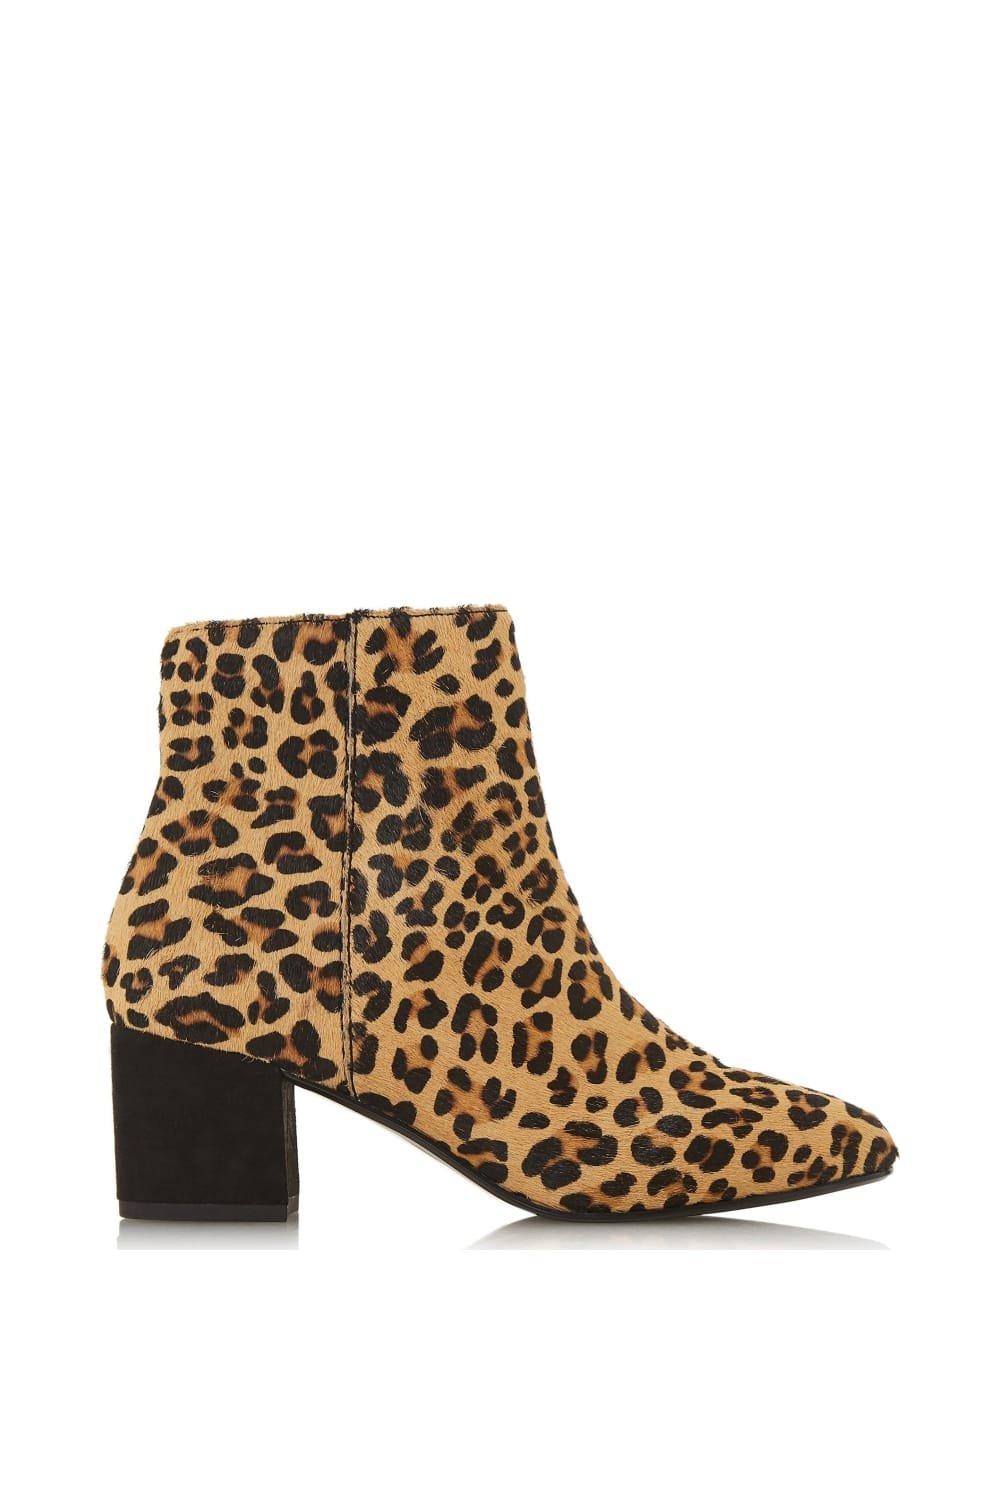 Boots | 'Olyvea' Suede Ankle Boots | Dune London